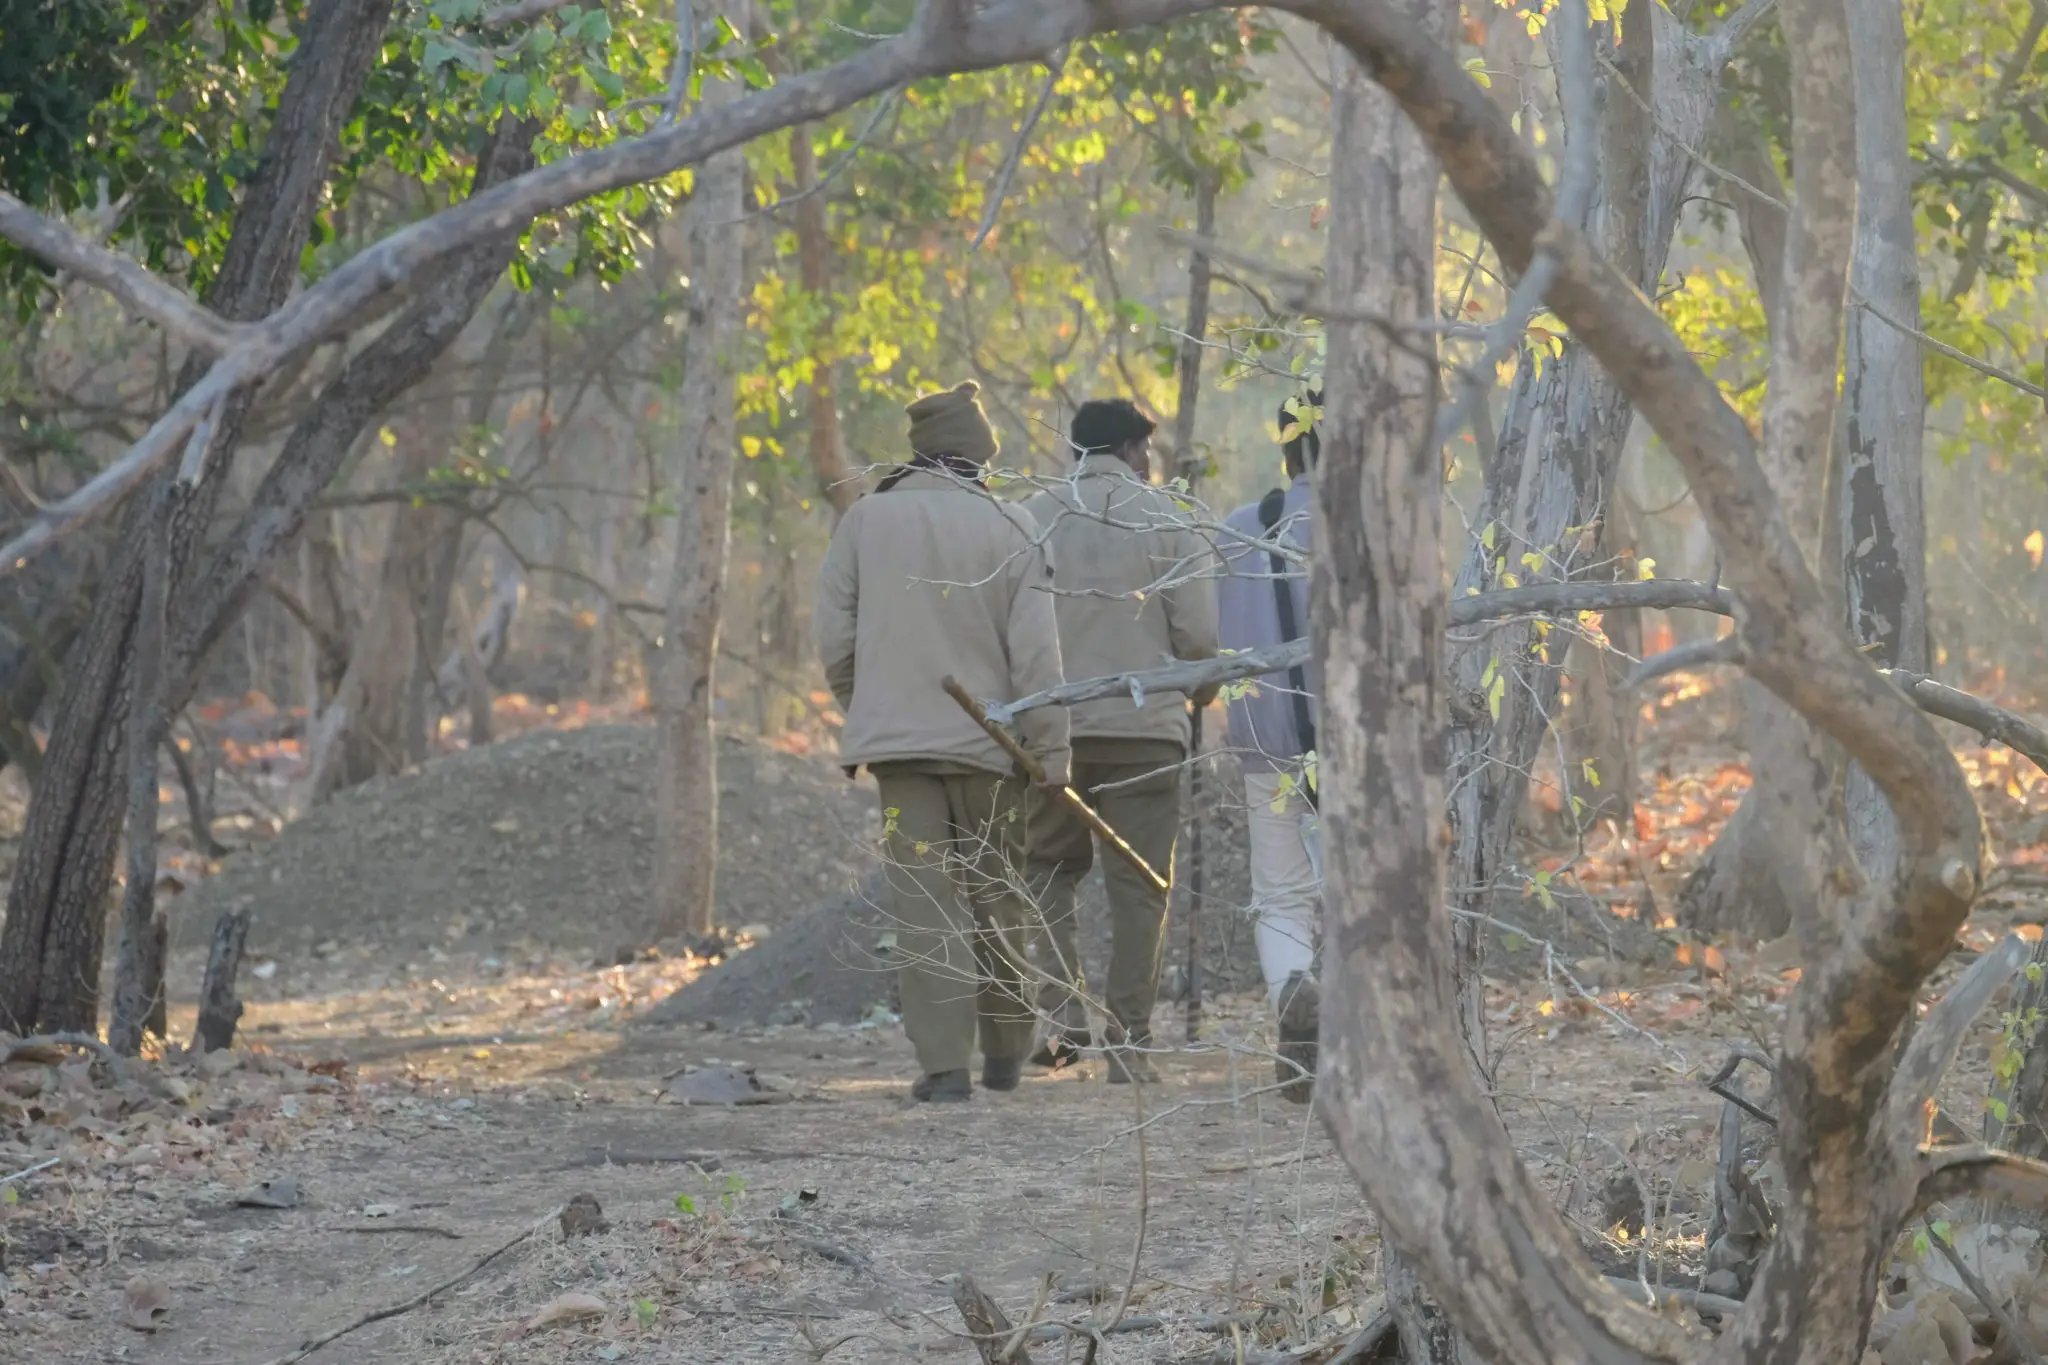 Spotters looking for lions at Gir National Park, Gujarat